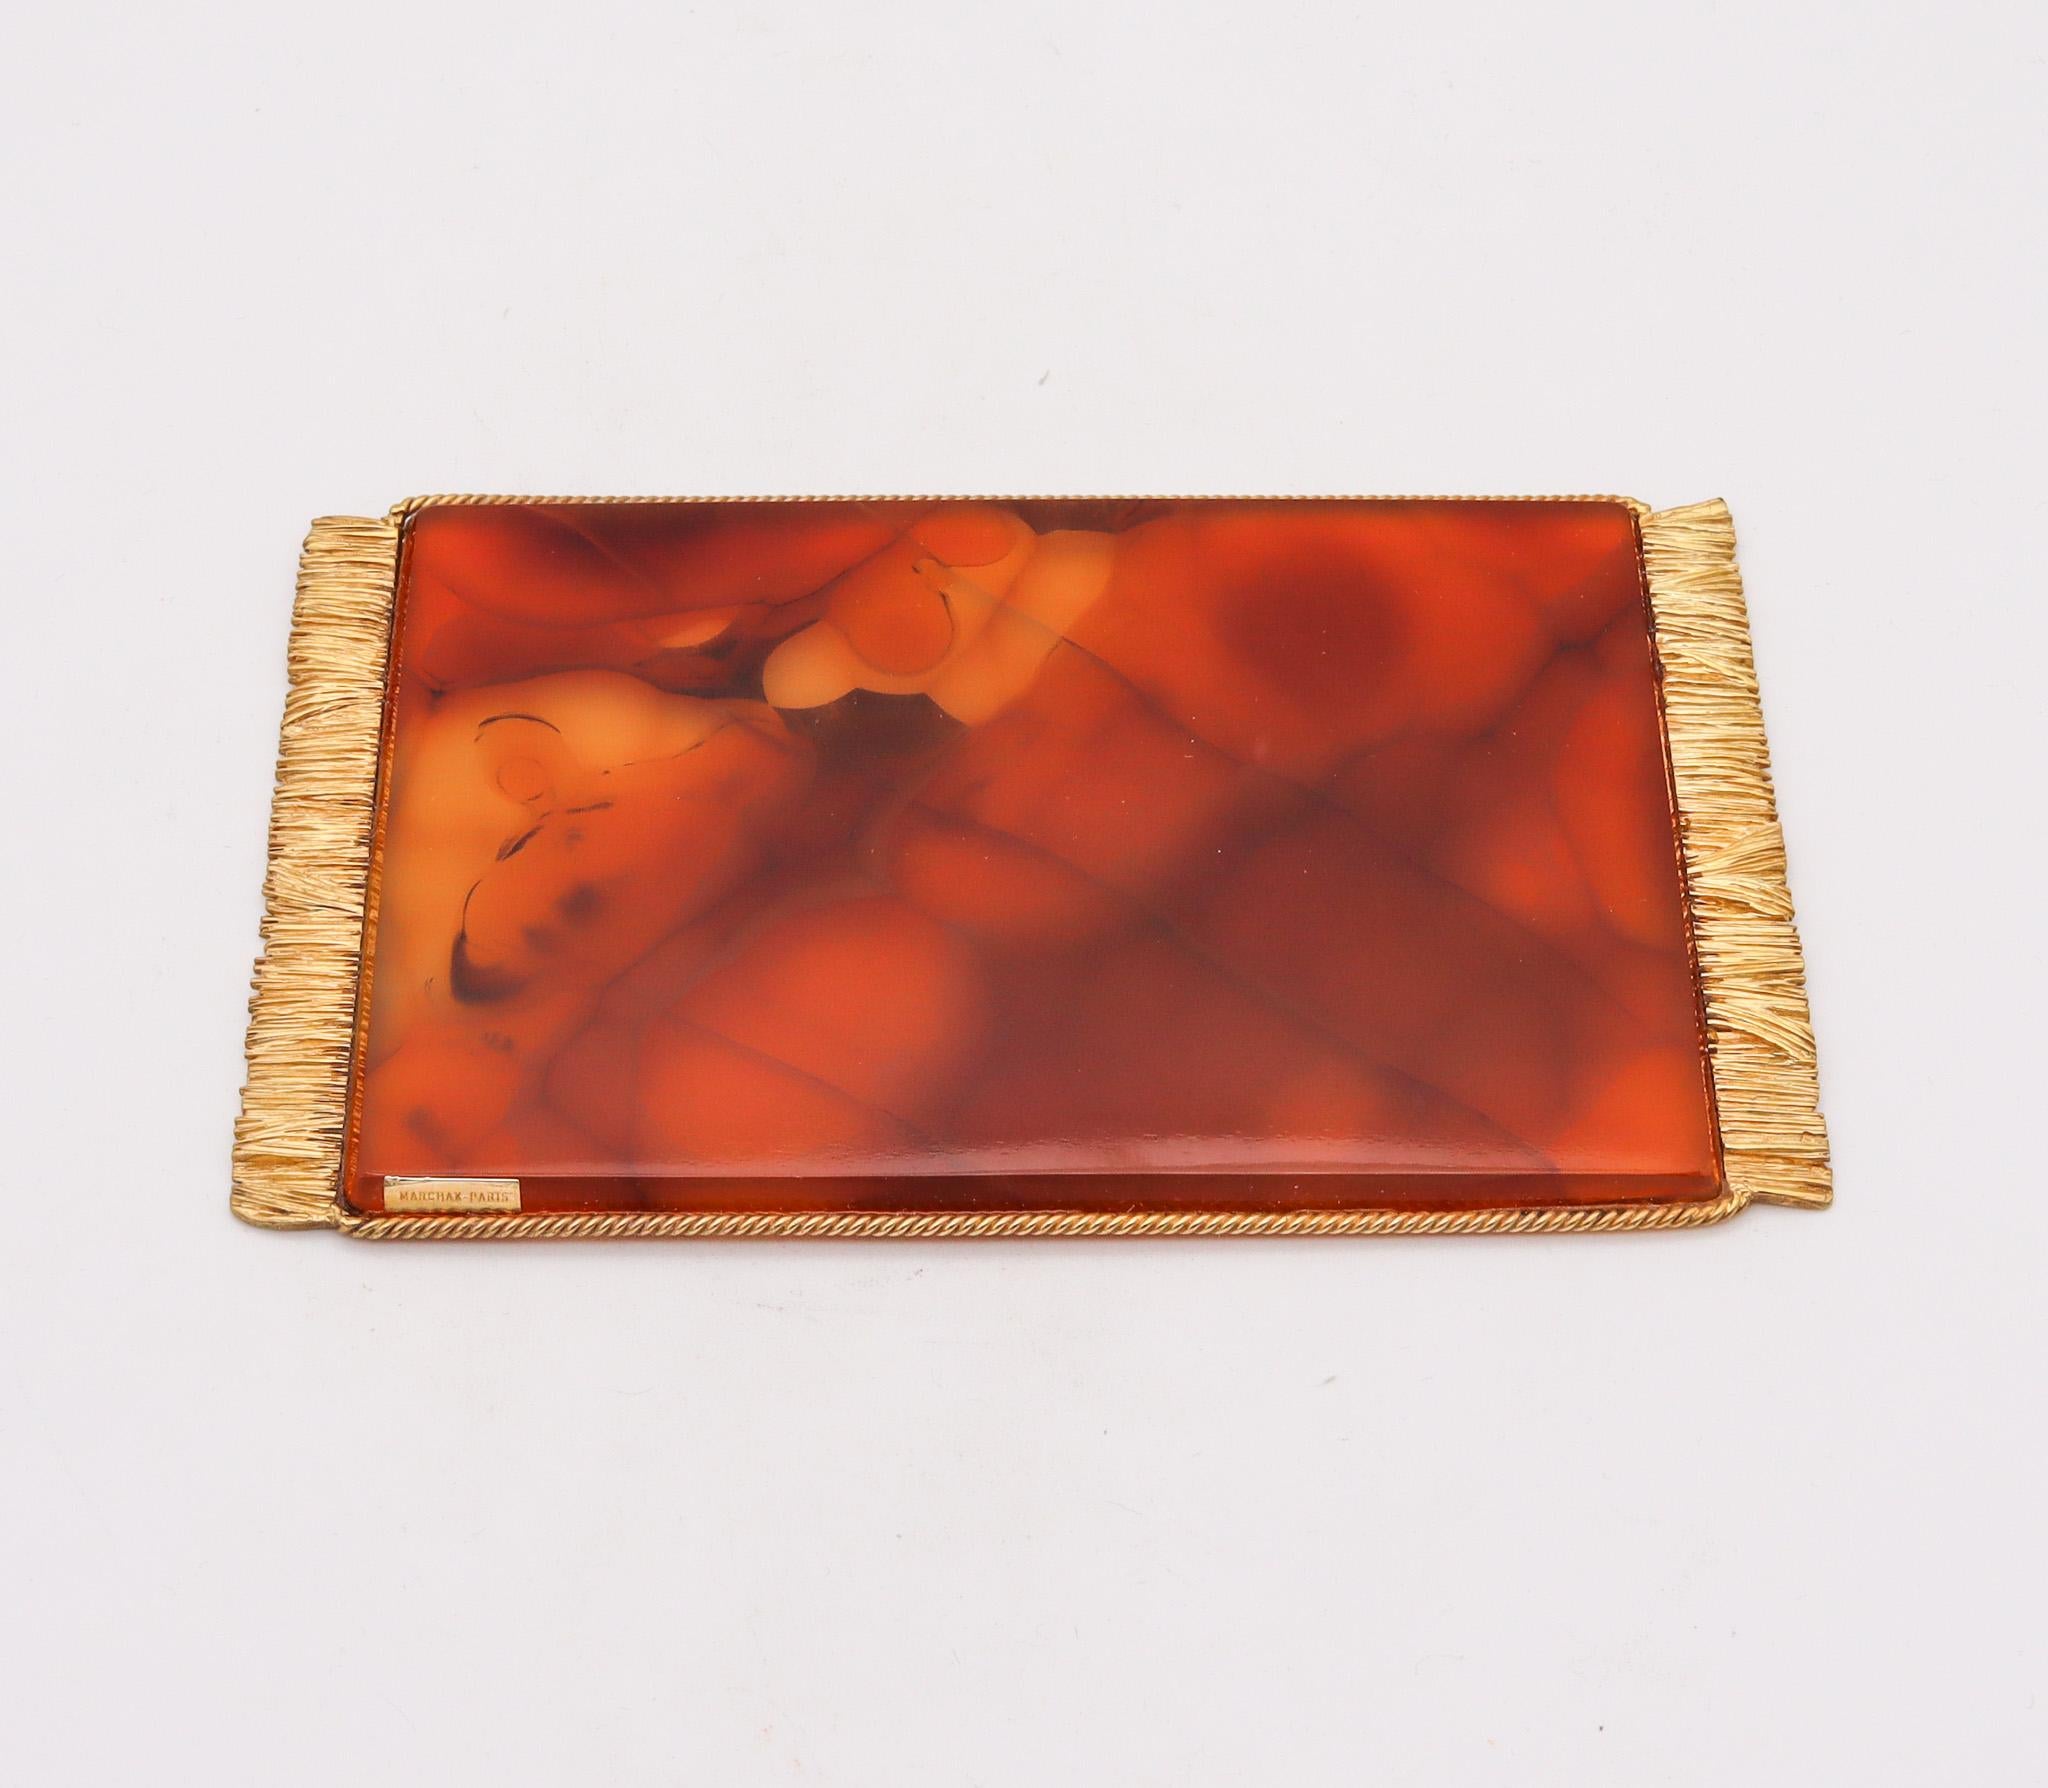 French Marchak Paris 1920 Art Deco Translucent Agate Desk Tray In Gilt Sterling Silver For Sale